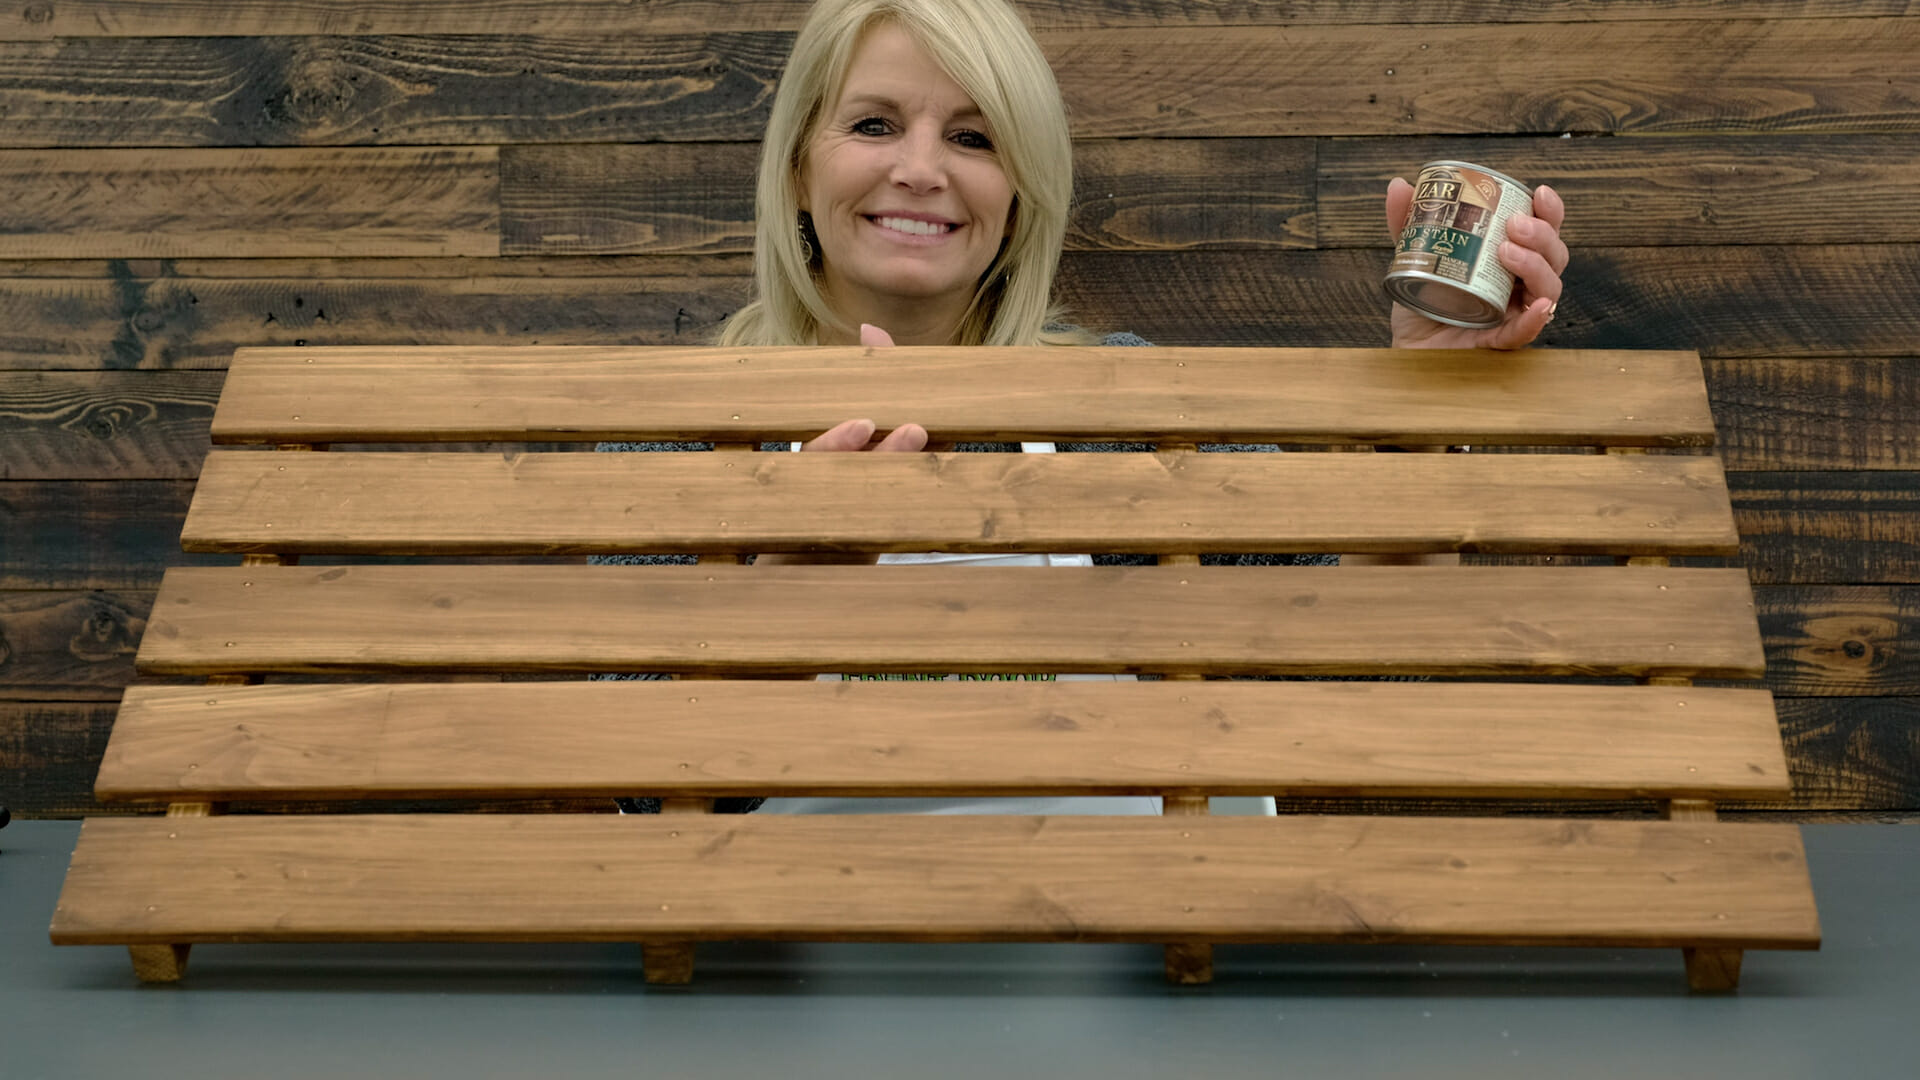 A smiling woman holding a section of a short wood picket fence and a can of wood stain.